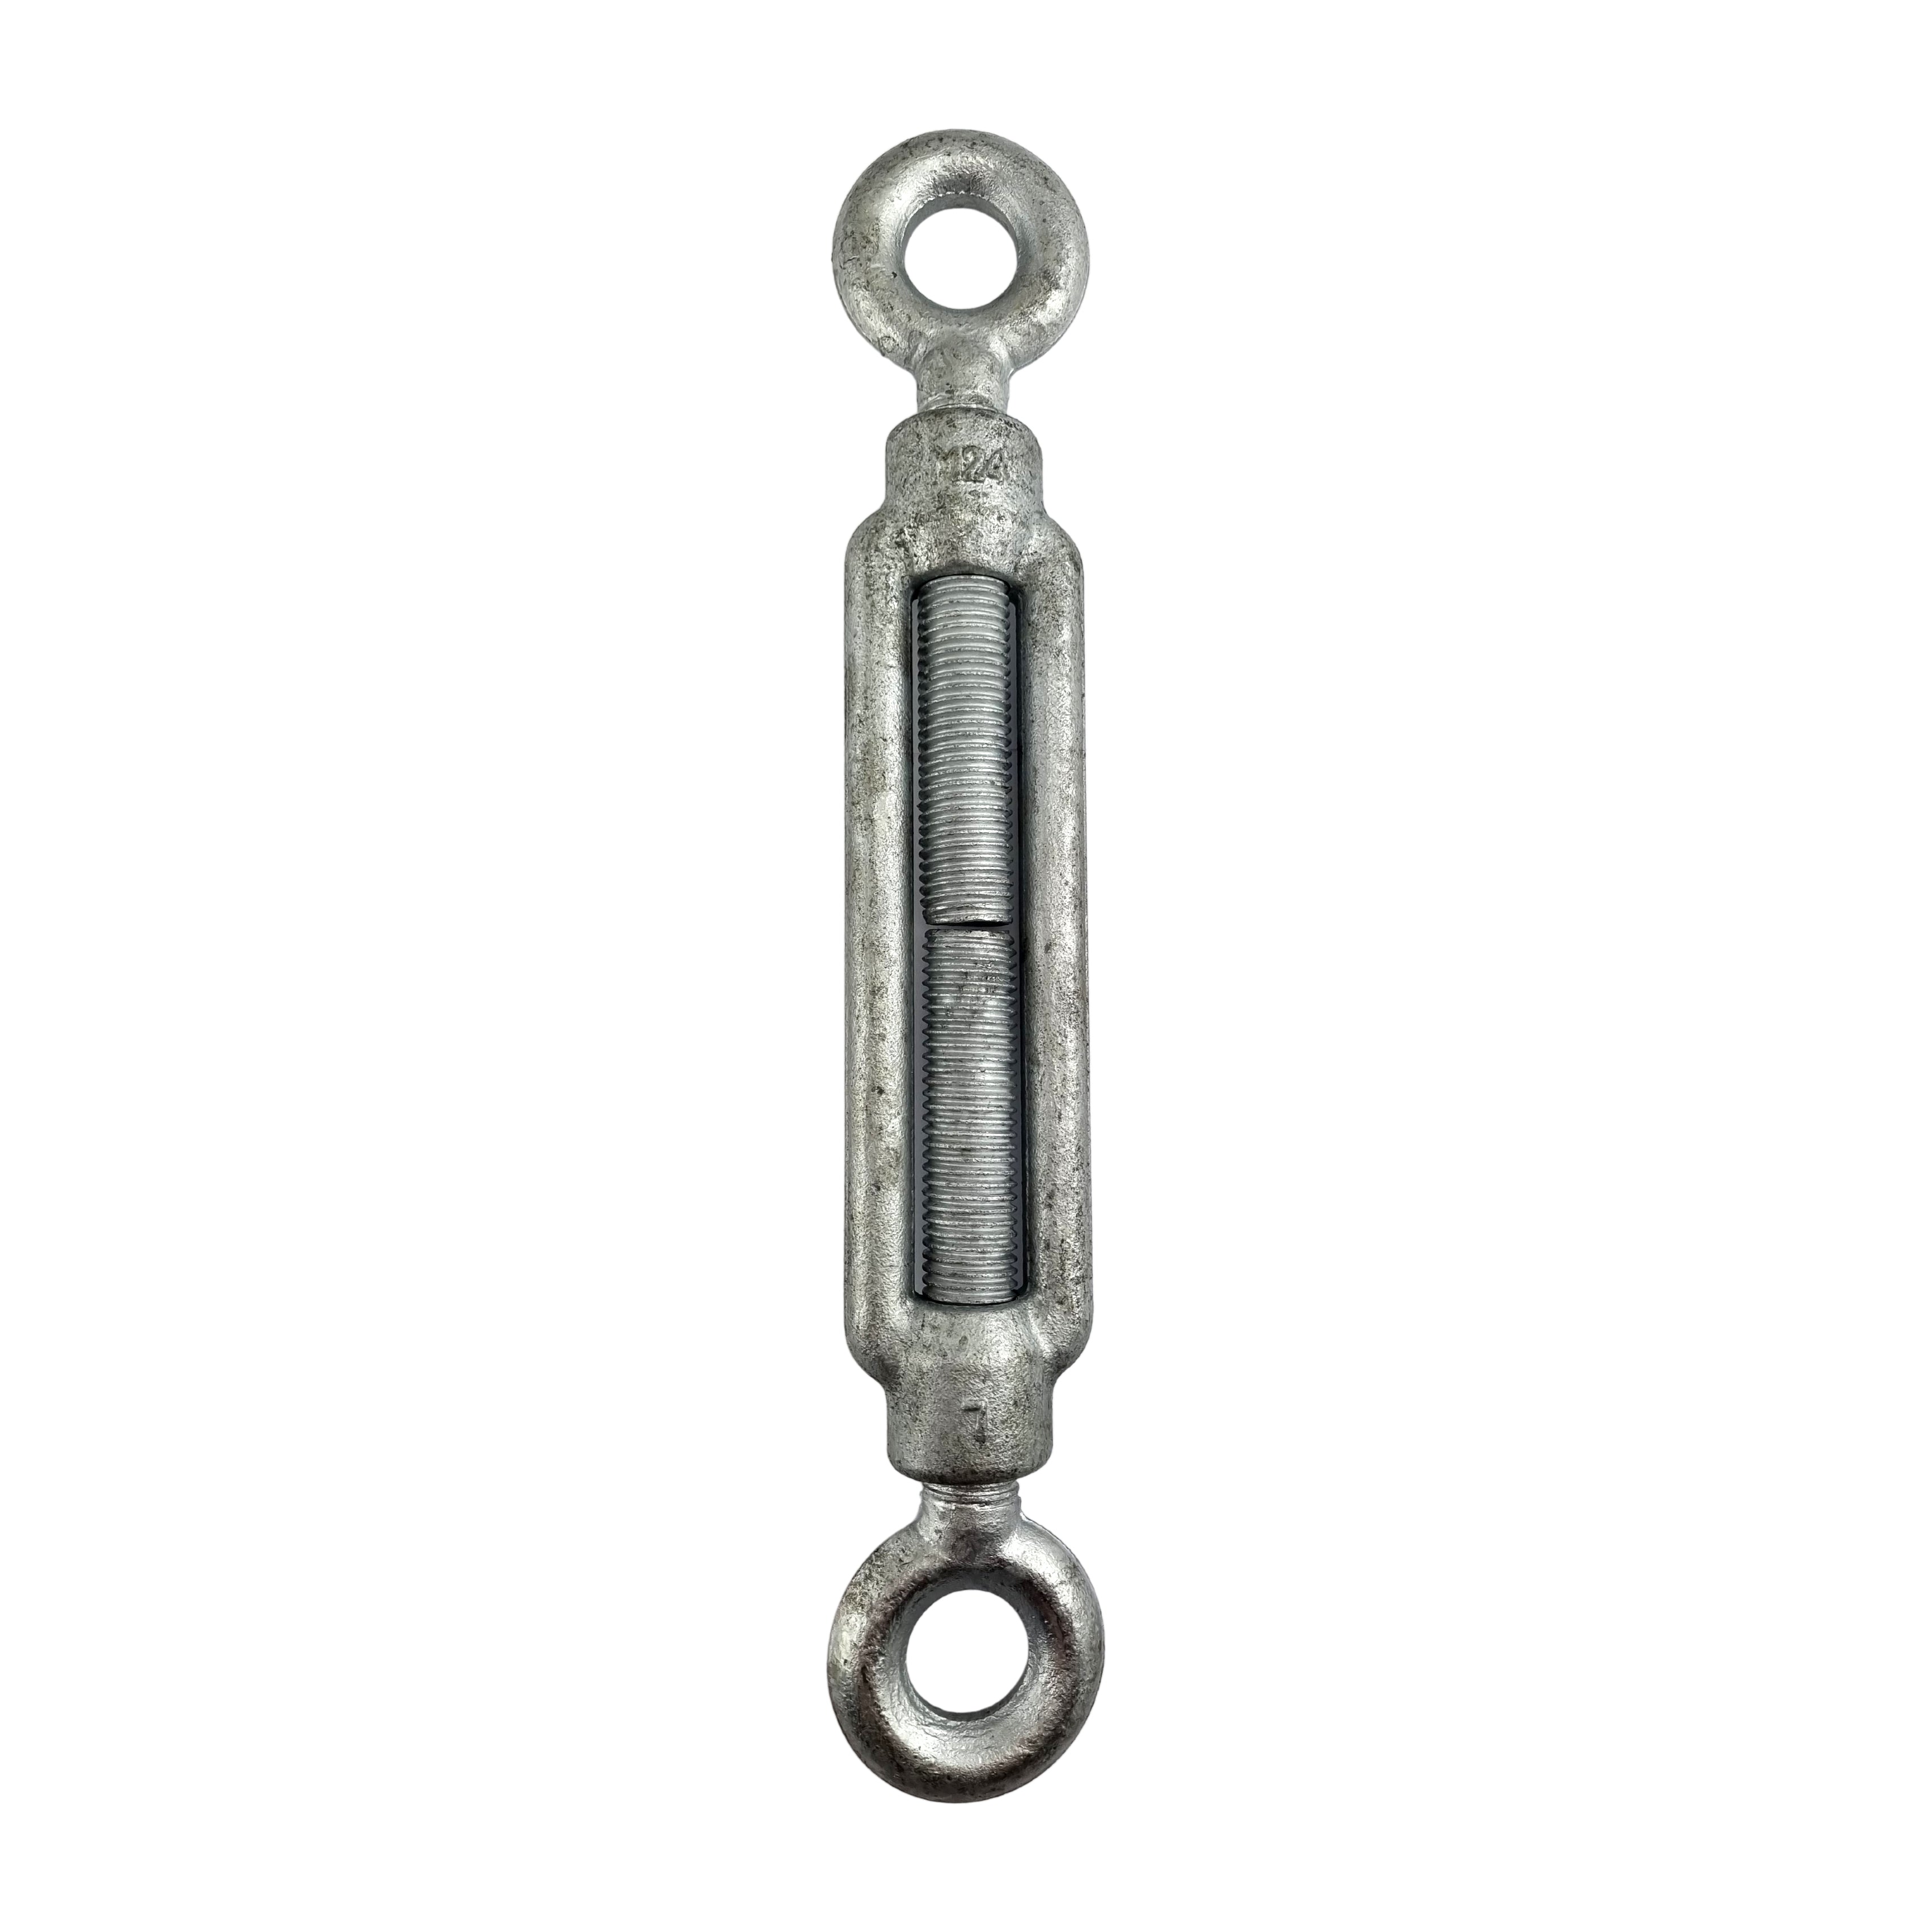 Eye-Eye Turnbuckles Galvanised. Shop hardware online chain.com.au. Australia wide delivery & Melbourne click & collect.